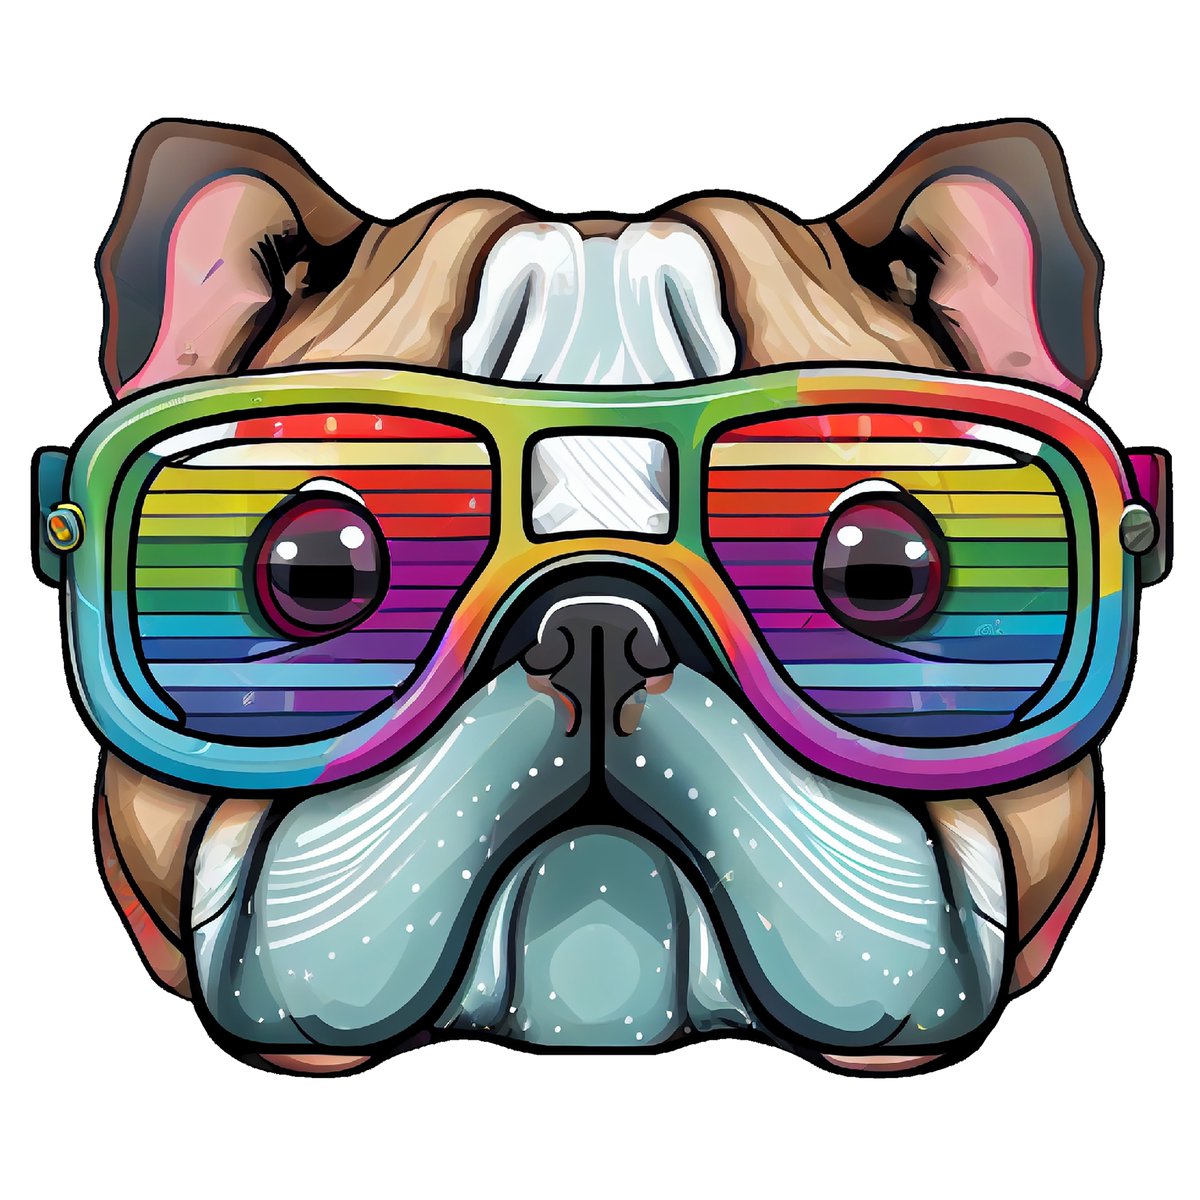 Introducing the Kawaii Synthwave bulldog the perfect accessory for dog lovers!
#kawaii #cutedogs #dogfashion #goggles  #anime #dogfather #bulldog  #doggo, #Pride #rainbow  #dogfighting #17march  #gamerlife #synthwave #psychedelic #mushroom😀